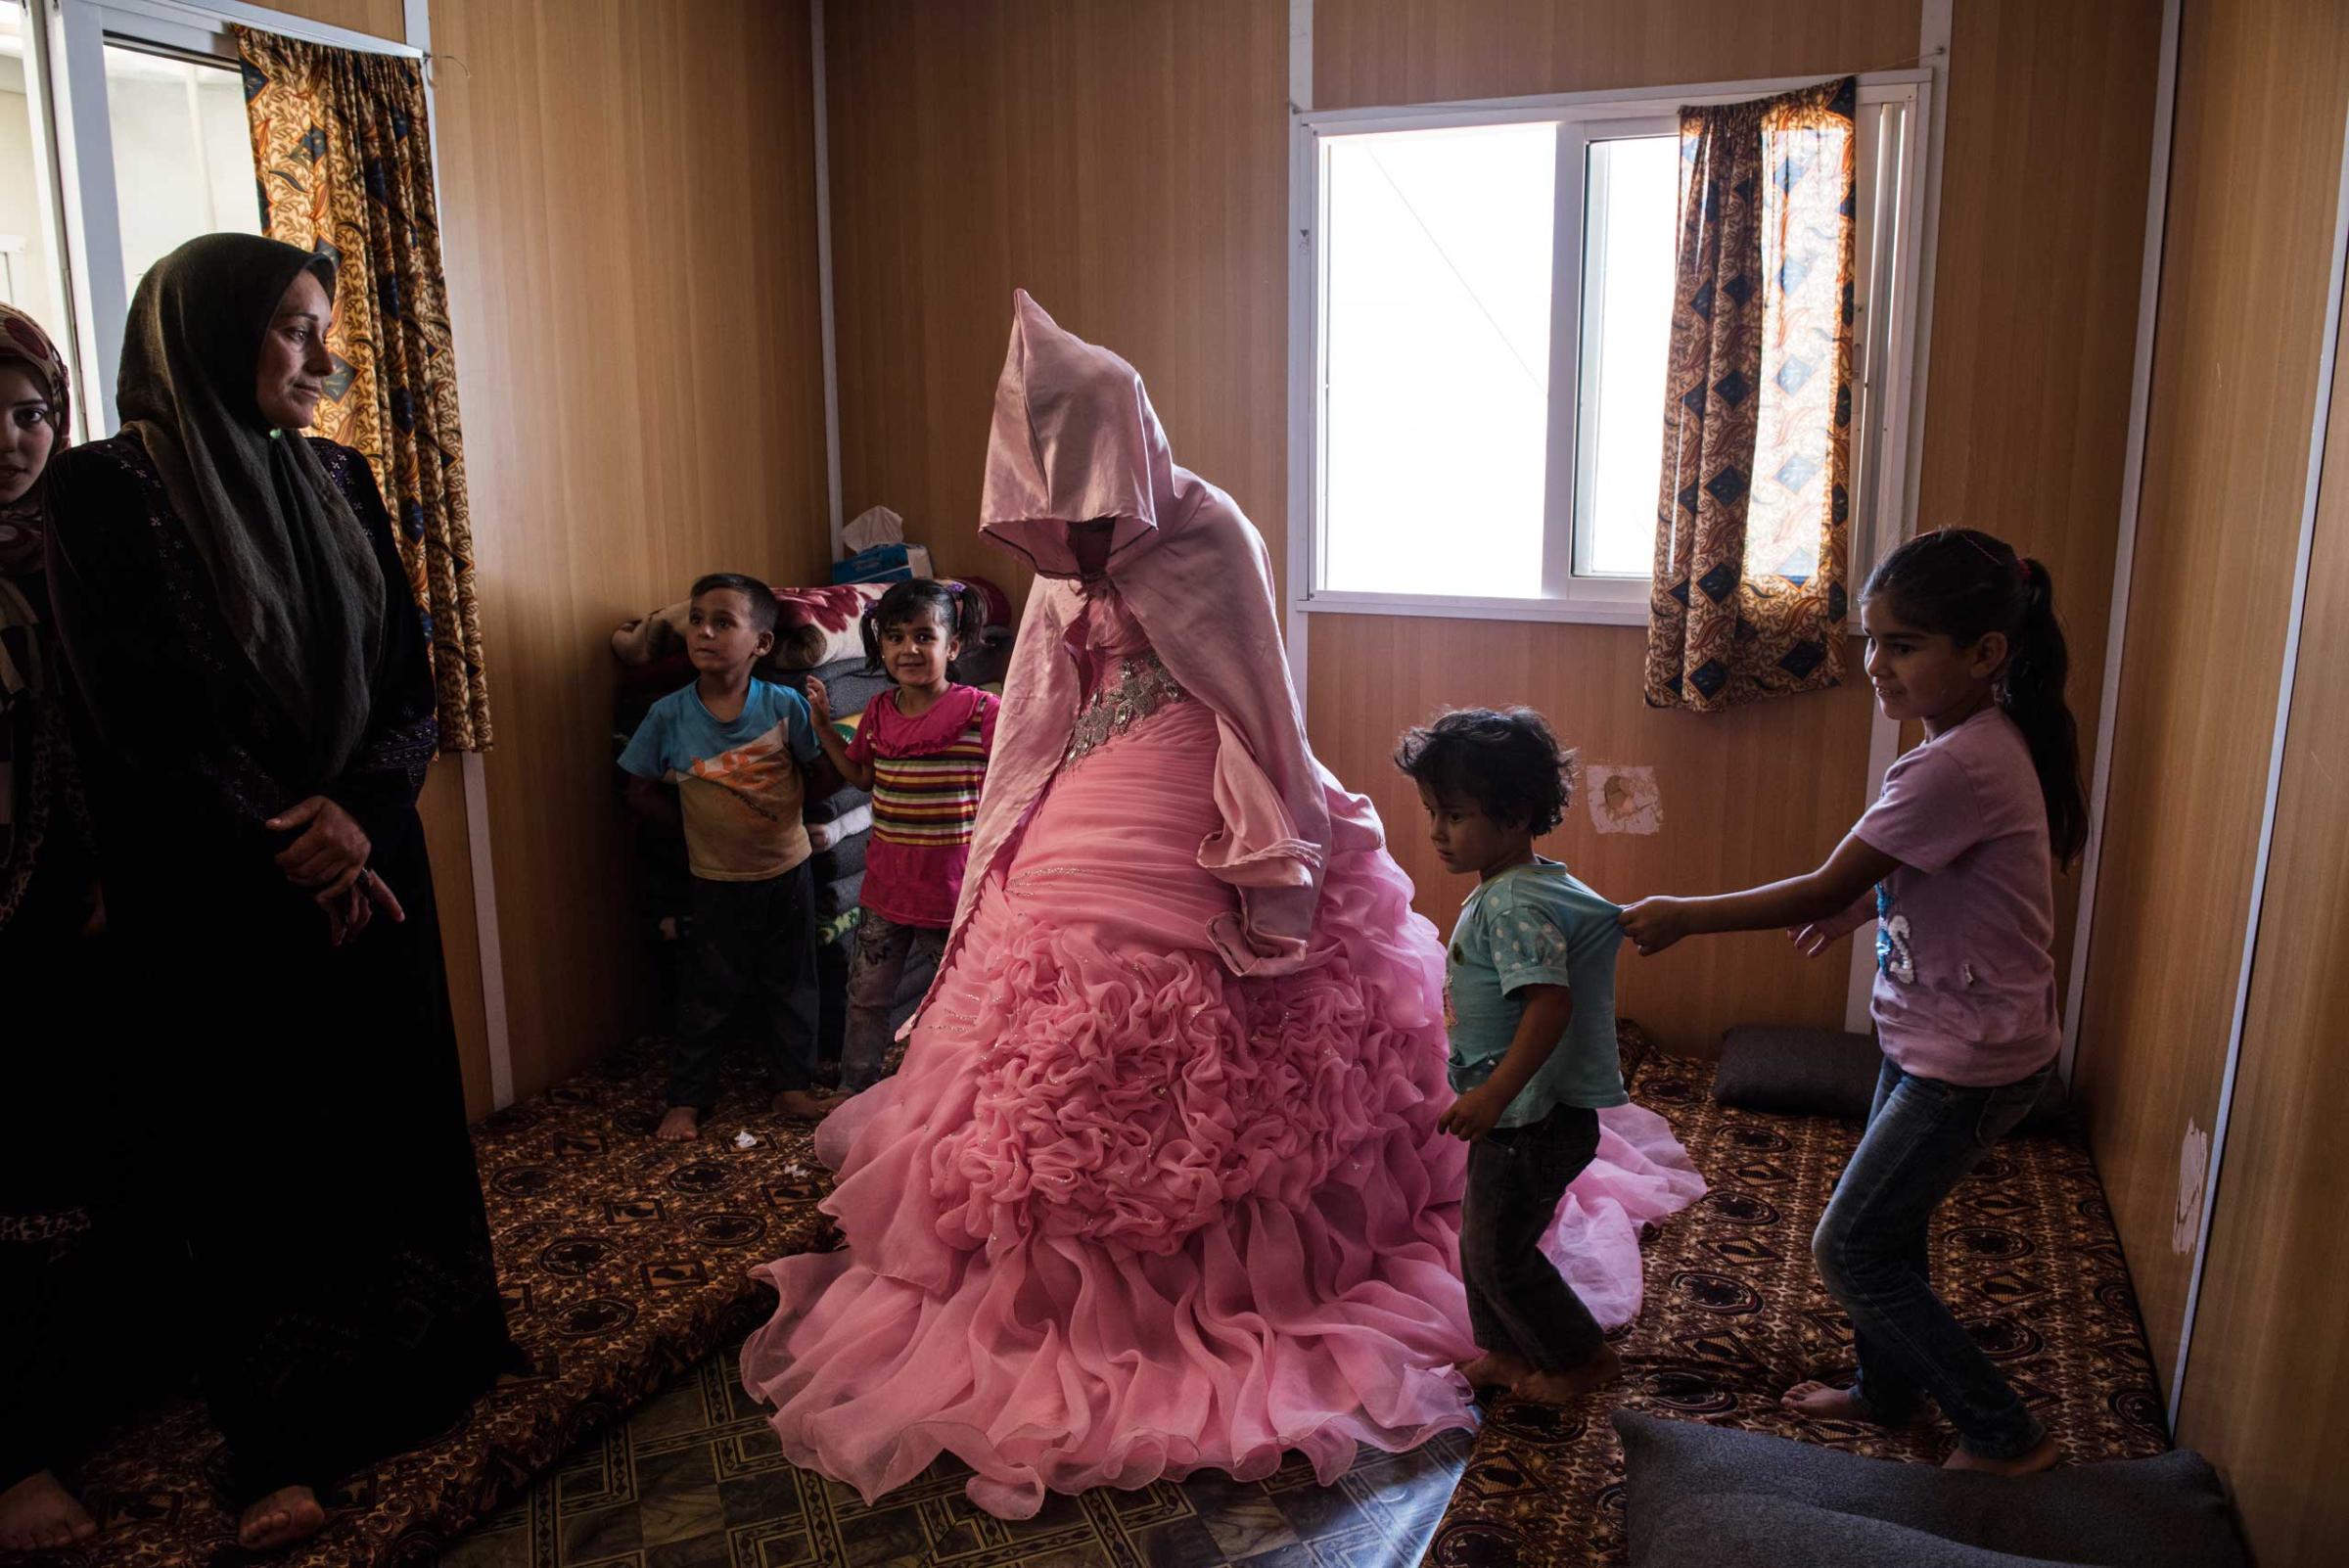 Rahaf Yousef, 13, a Syrian refugee from Daraa, poses for a portrait in her family's trailer as she is surrounded by female relatives on the day of her engagement party at the Zaatari refugee camp in Jordan, Aug. 29, 2014.